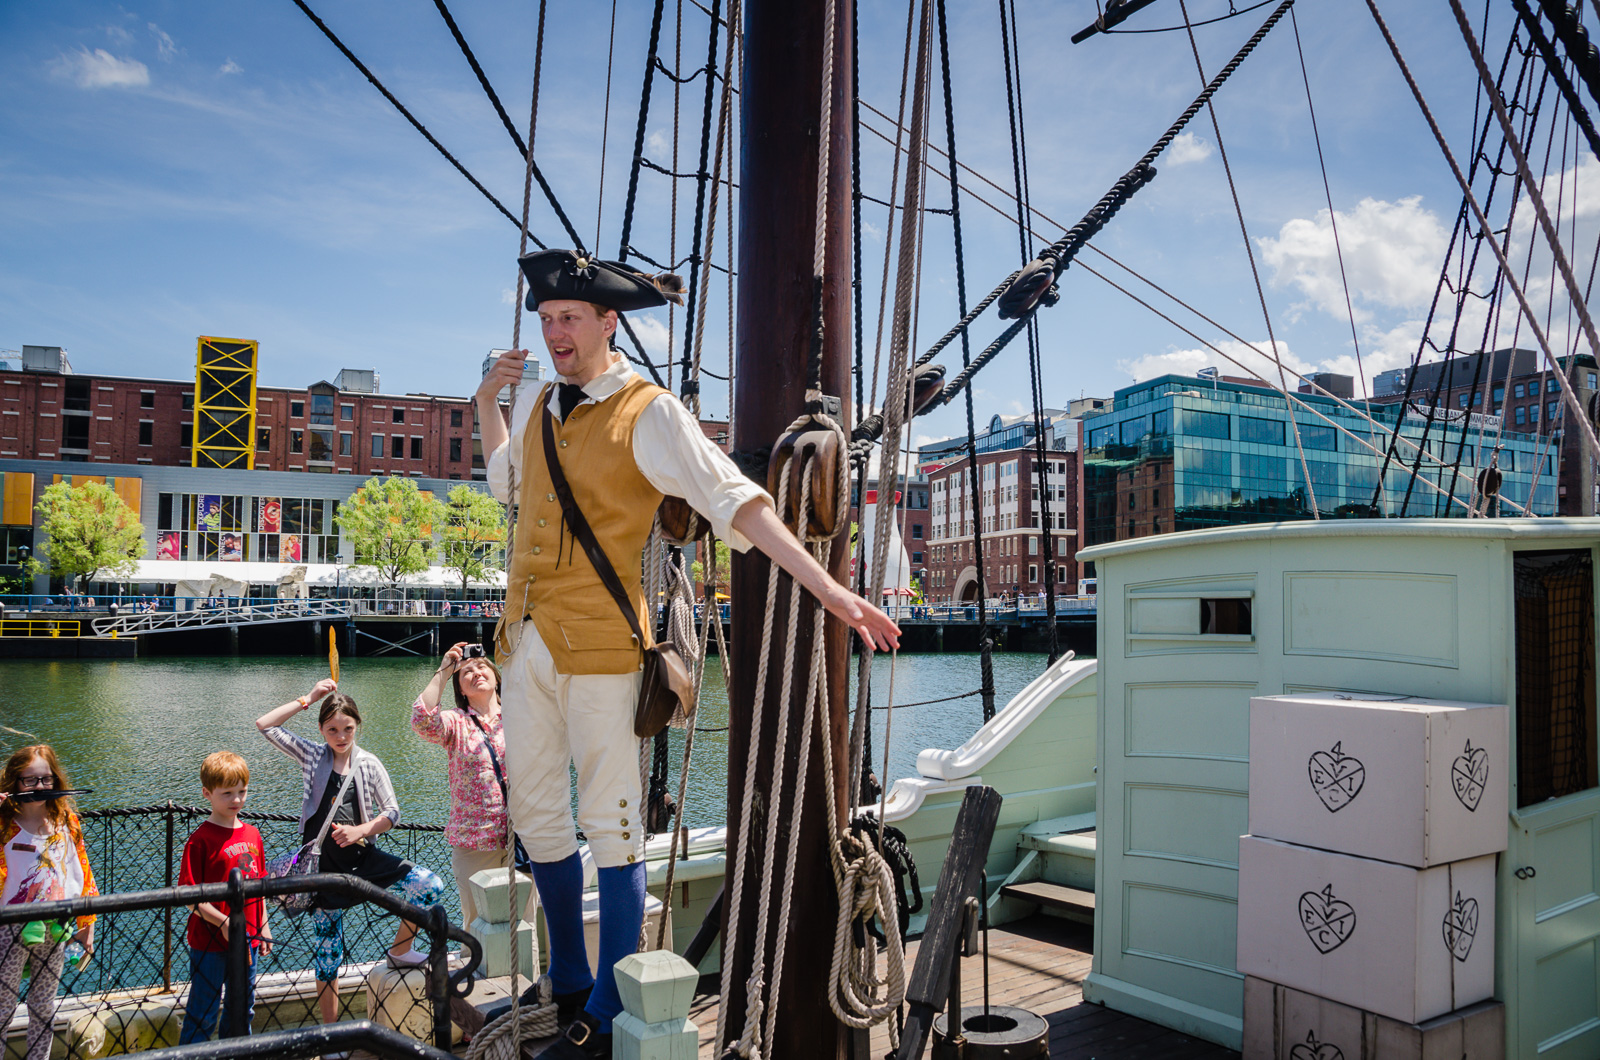 Reenactor calling for revolution on a tea ship replica at the Boston Tea Party Museum in Boston, MA. #history #USA @GetawayMavens